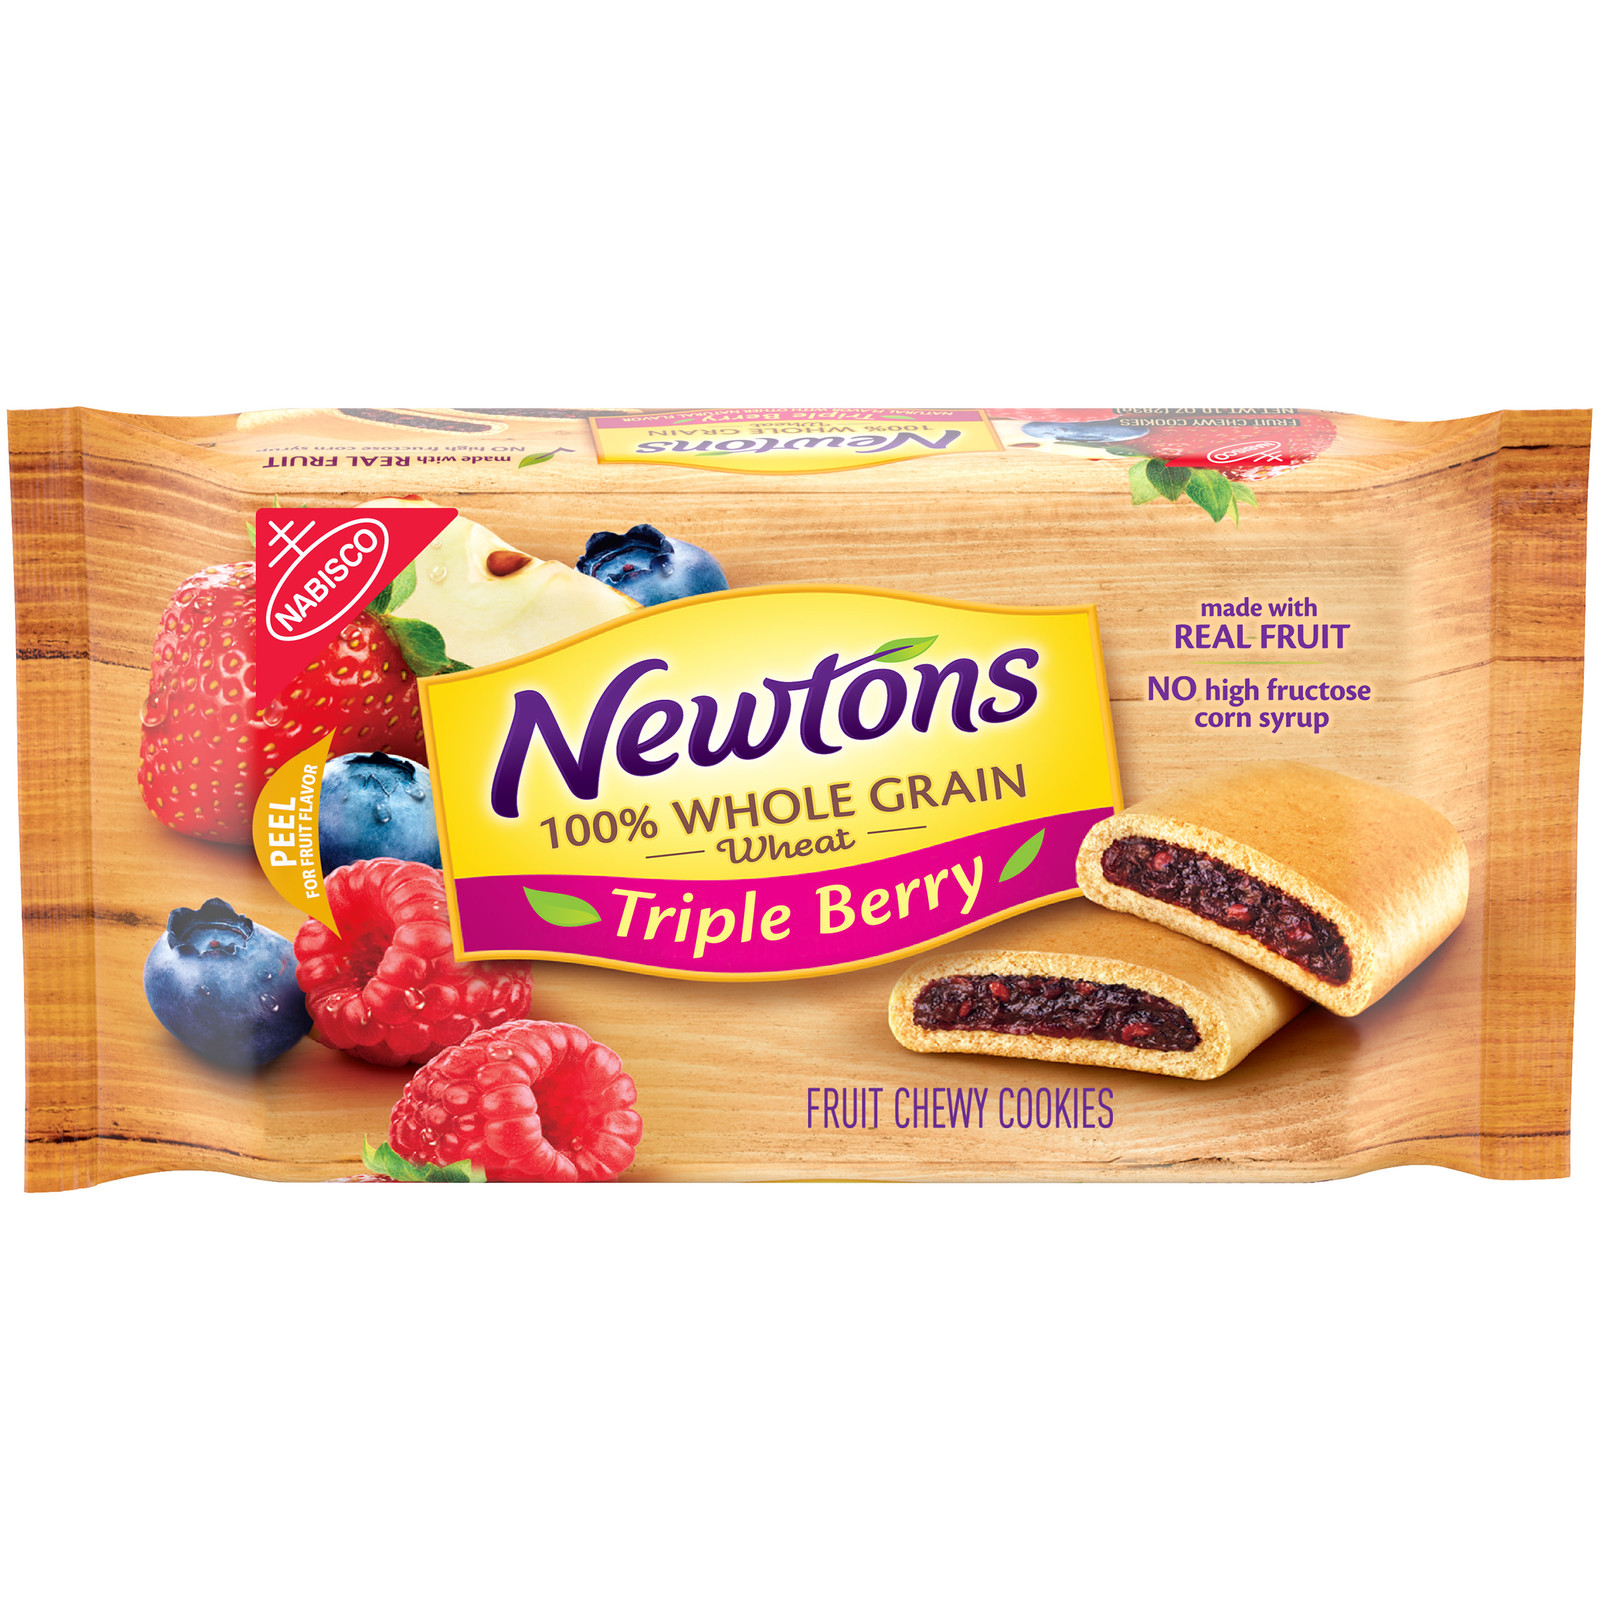 NABISCO Newtons Soft & Fruit Chewy Triple Berry Fruit Cookies Pack - 10 oz.